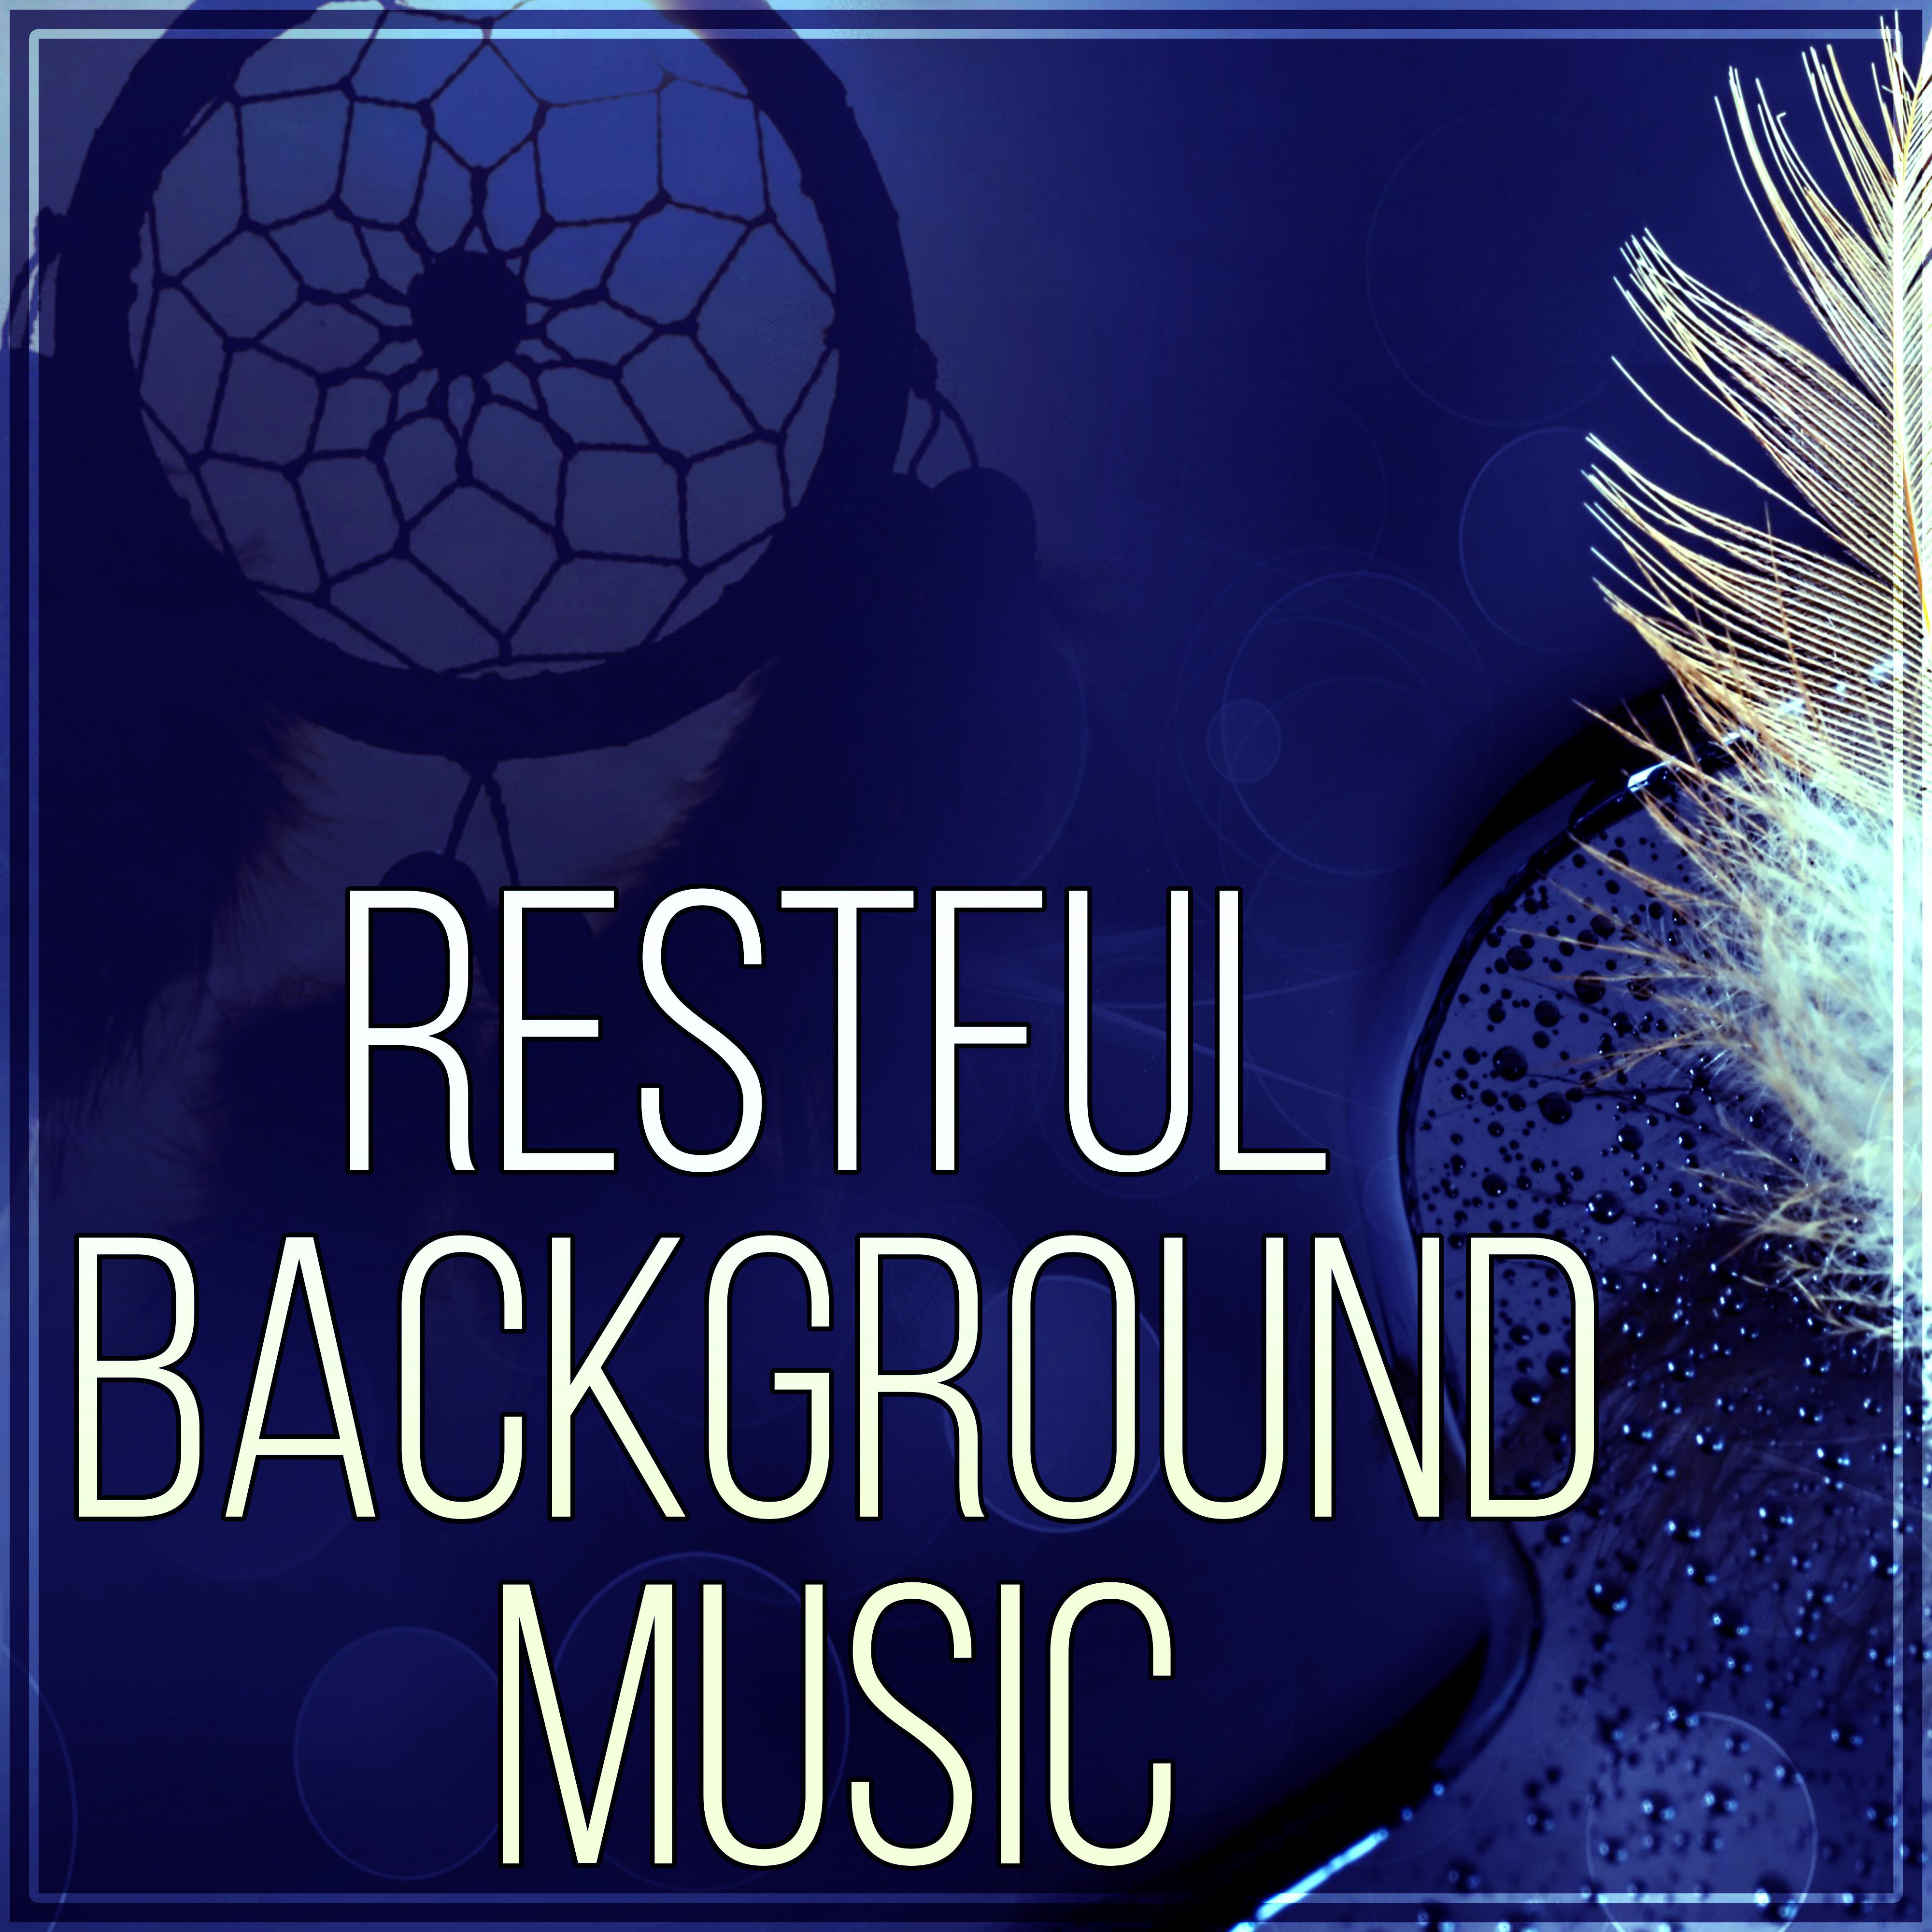 Restful Background Music - Stress Relief, The Best Music for Sleep, Relaxing Background Music, Sweet Dreams, Inner Peace, Soothing Sounds & Beautiful Piano Music for Lounge